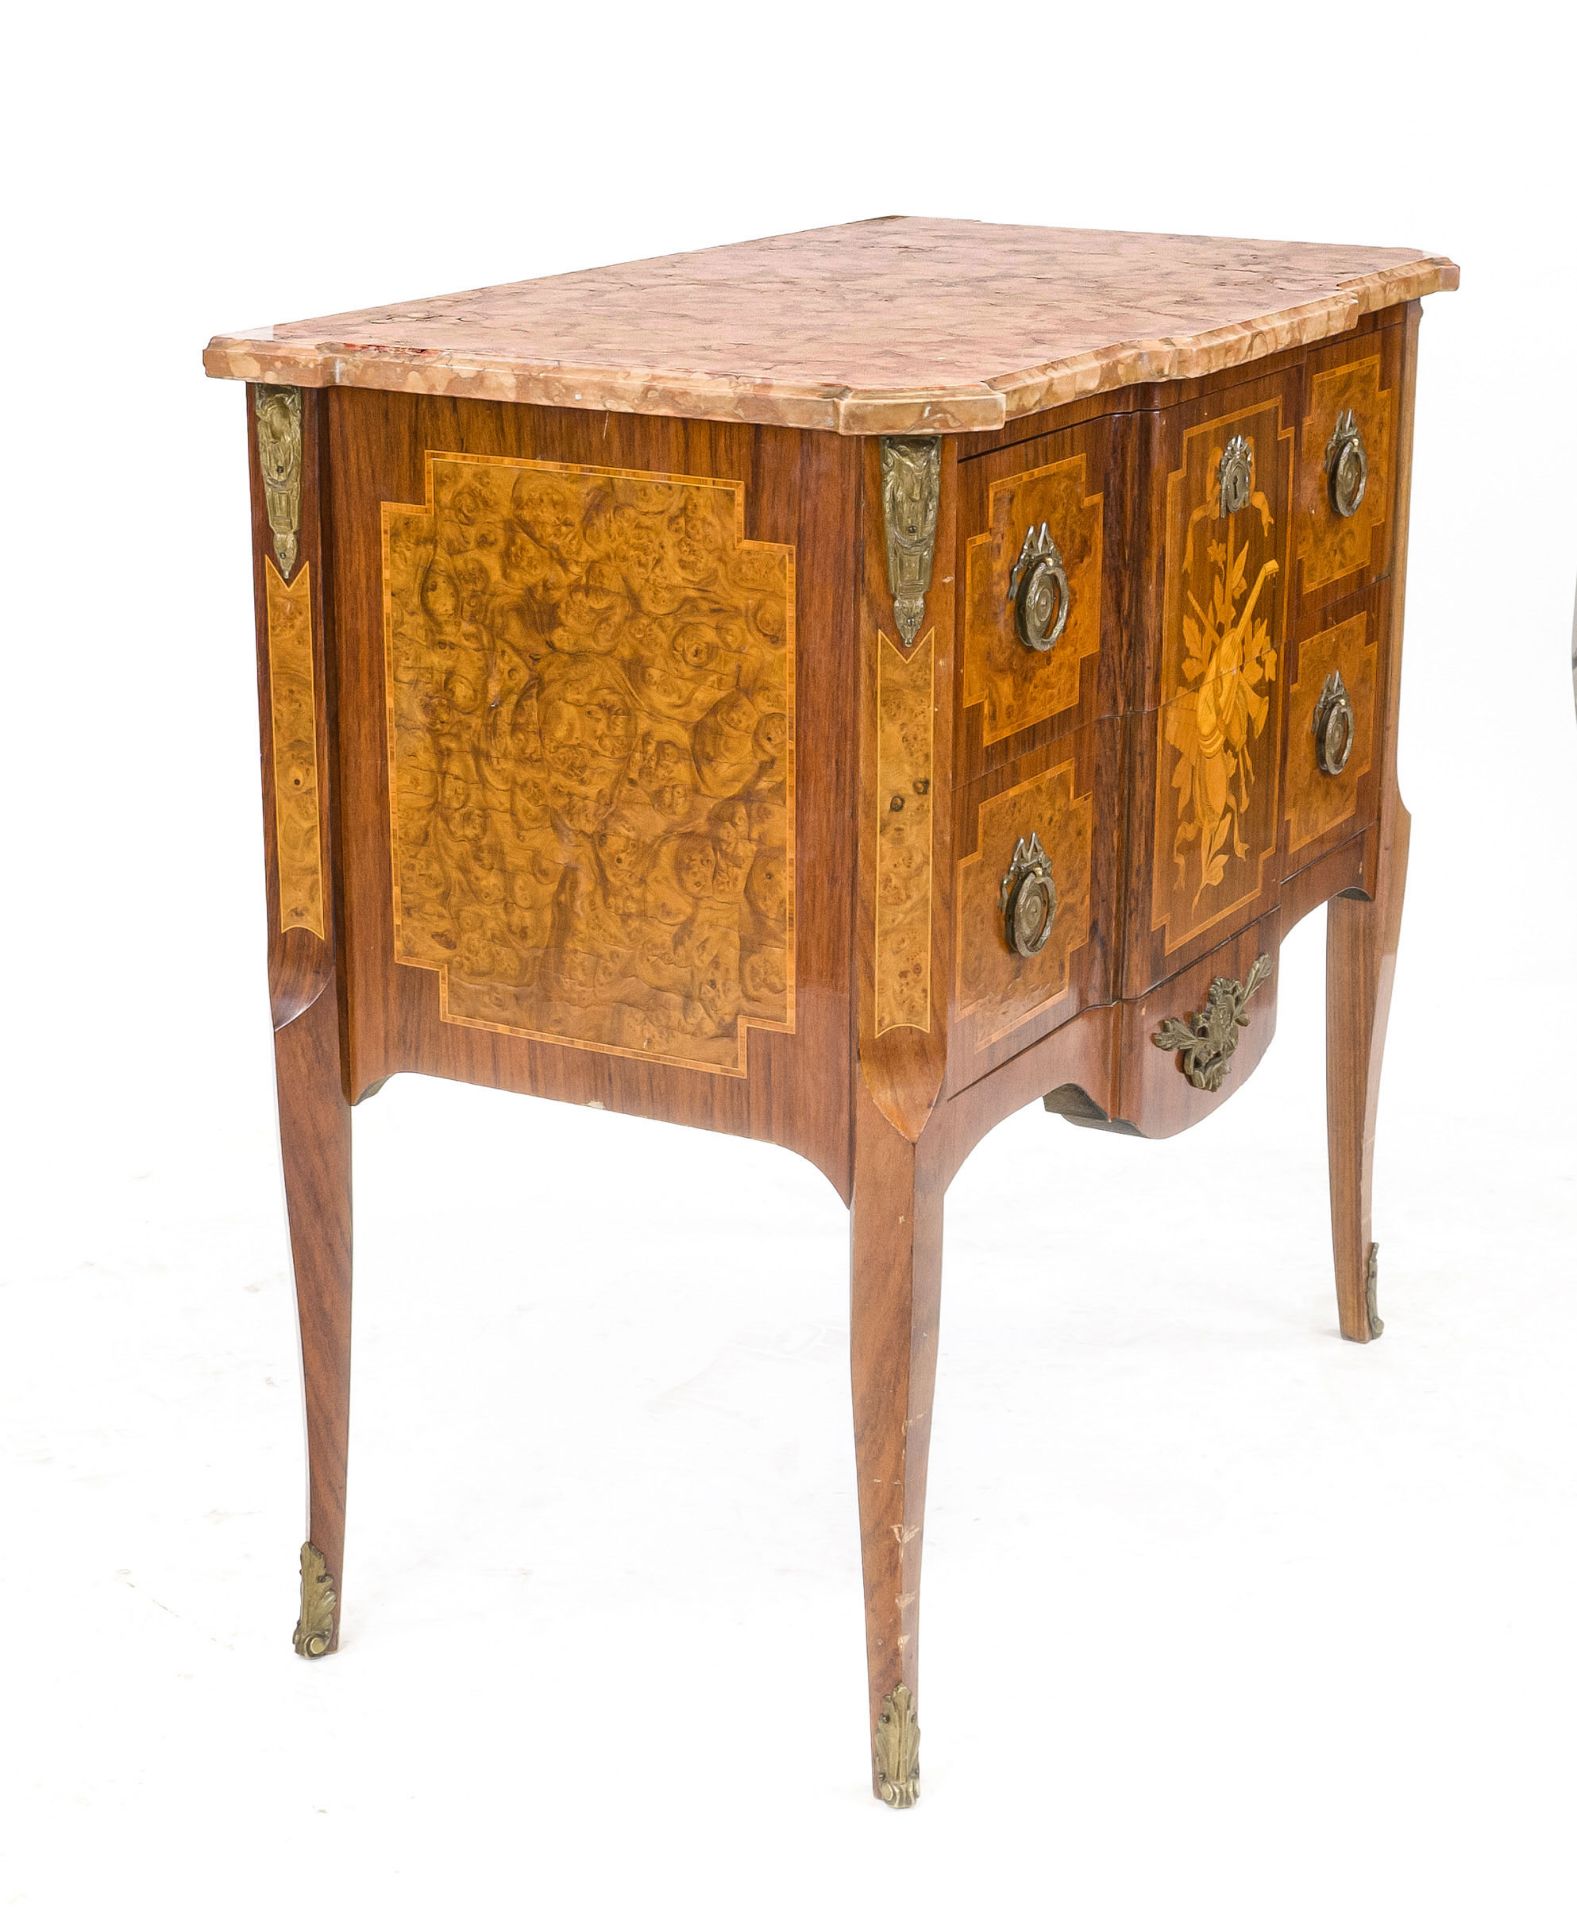 Classicist-style chest of drawers, 20th century, walnut and other precious woods, rose-colored stone - Image 3 of 3